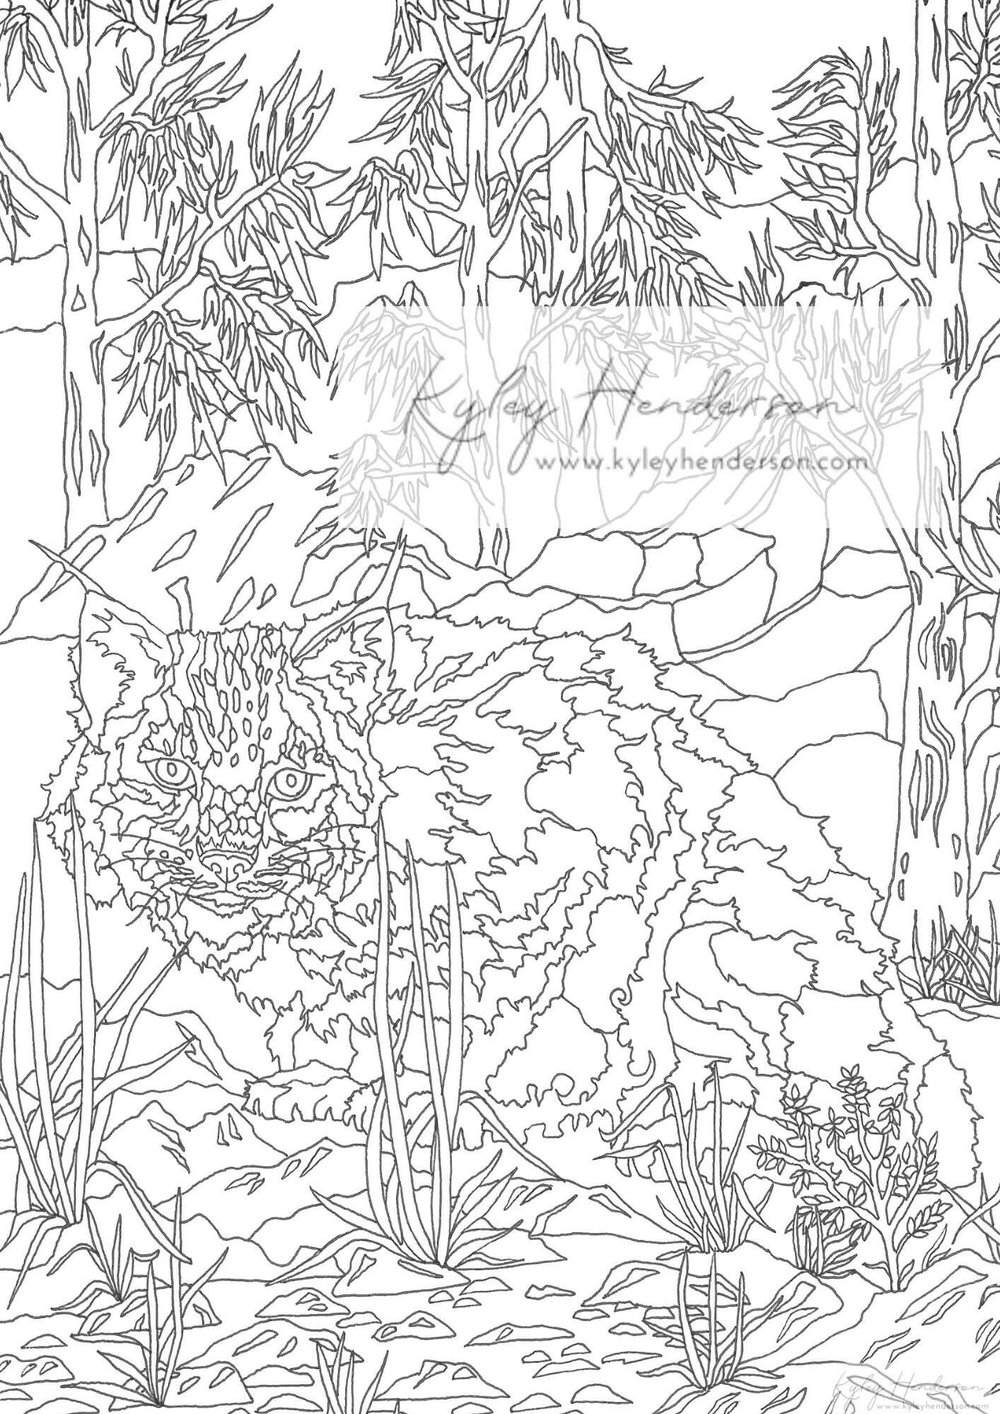 Adult coloring pages printable forest animal coloring book pages hand drawn animal coloring pages â kyley henderson art